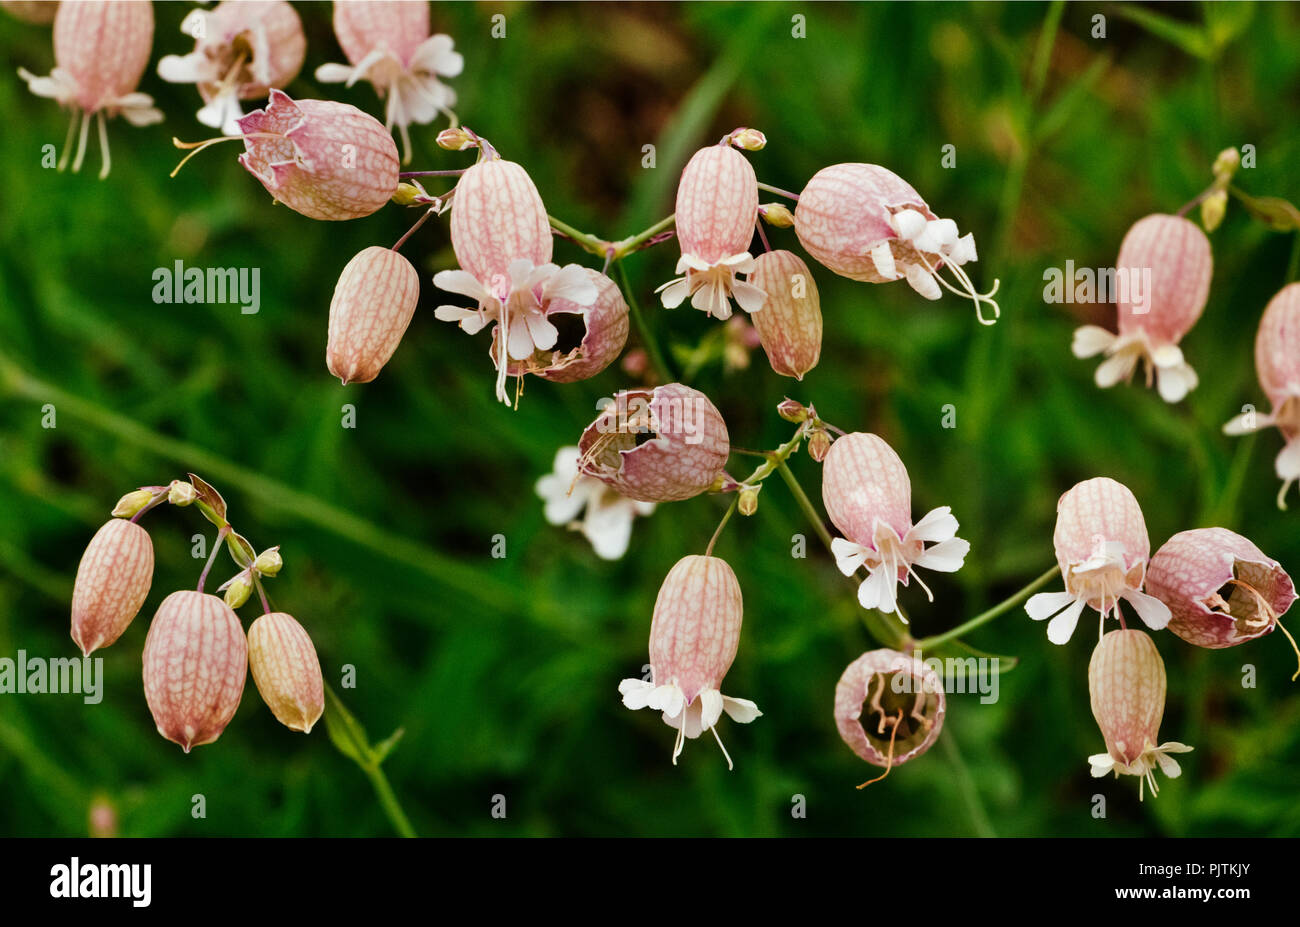 Bladder campion or silene vulgaris flowers  in a field ,a white  flower  on a reddish calyx in a green and out of focus background Stock Photo